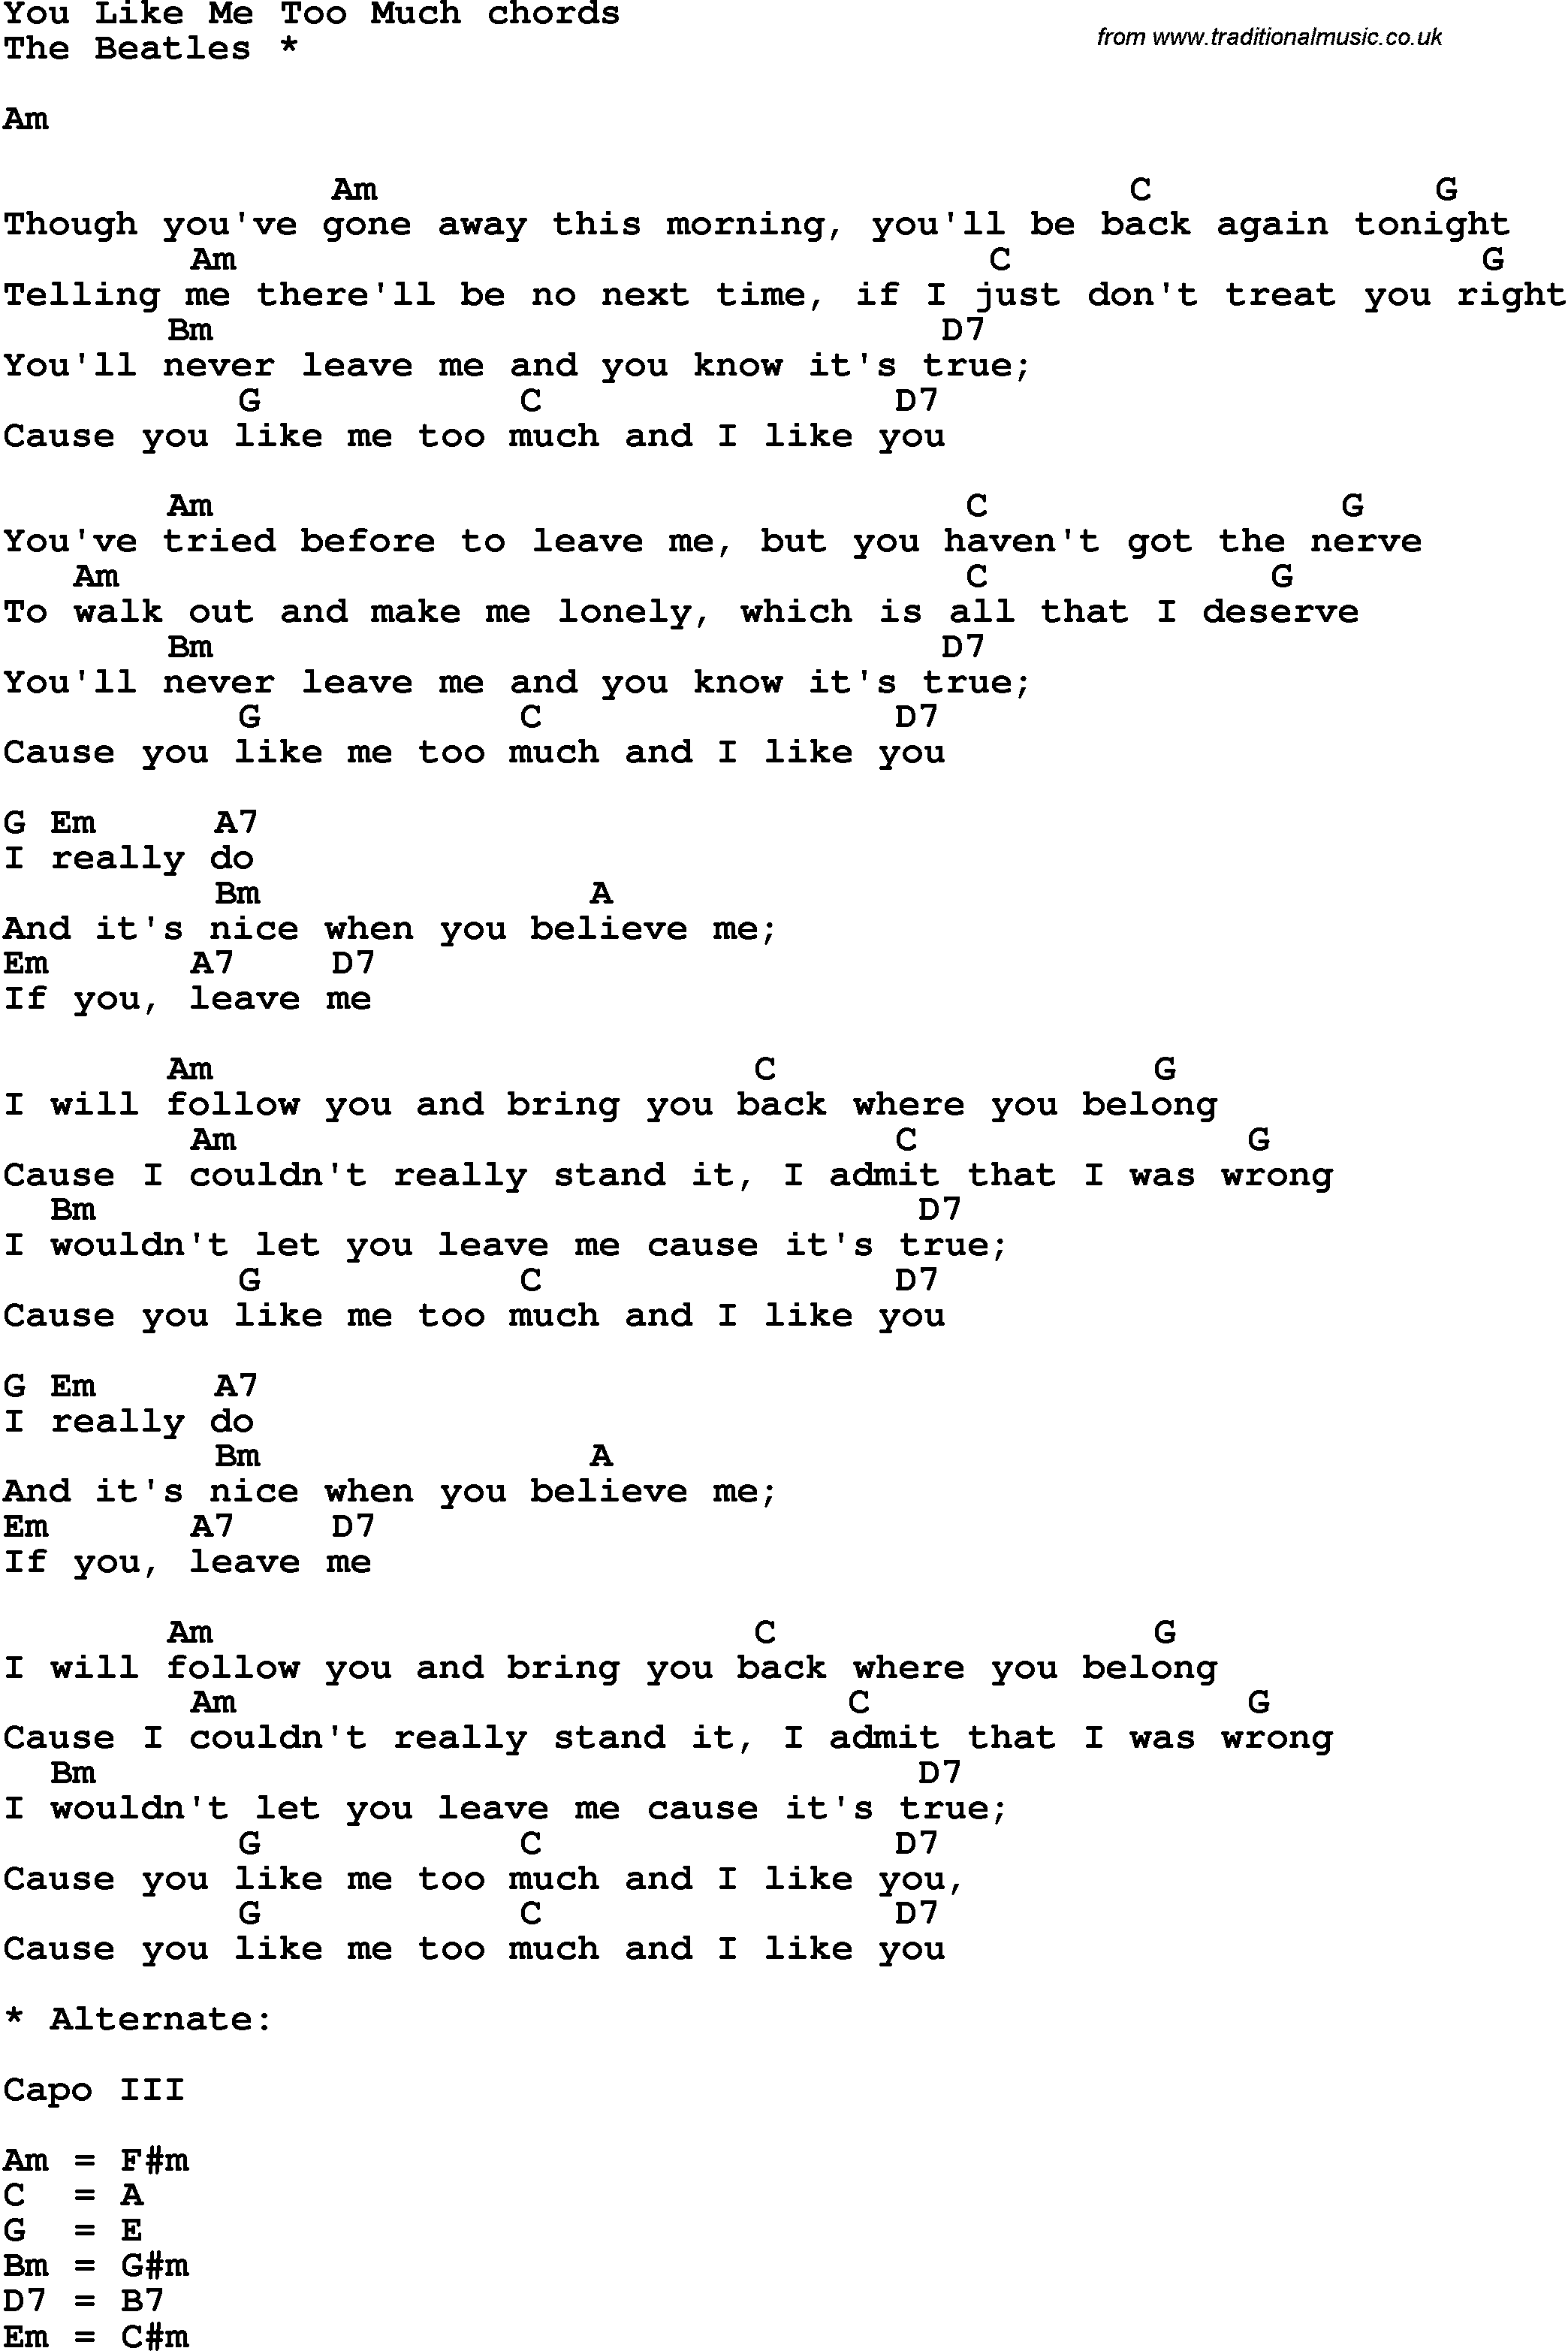 Song Lyrics with guitar chords for You Like Me Too Much